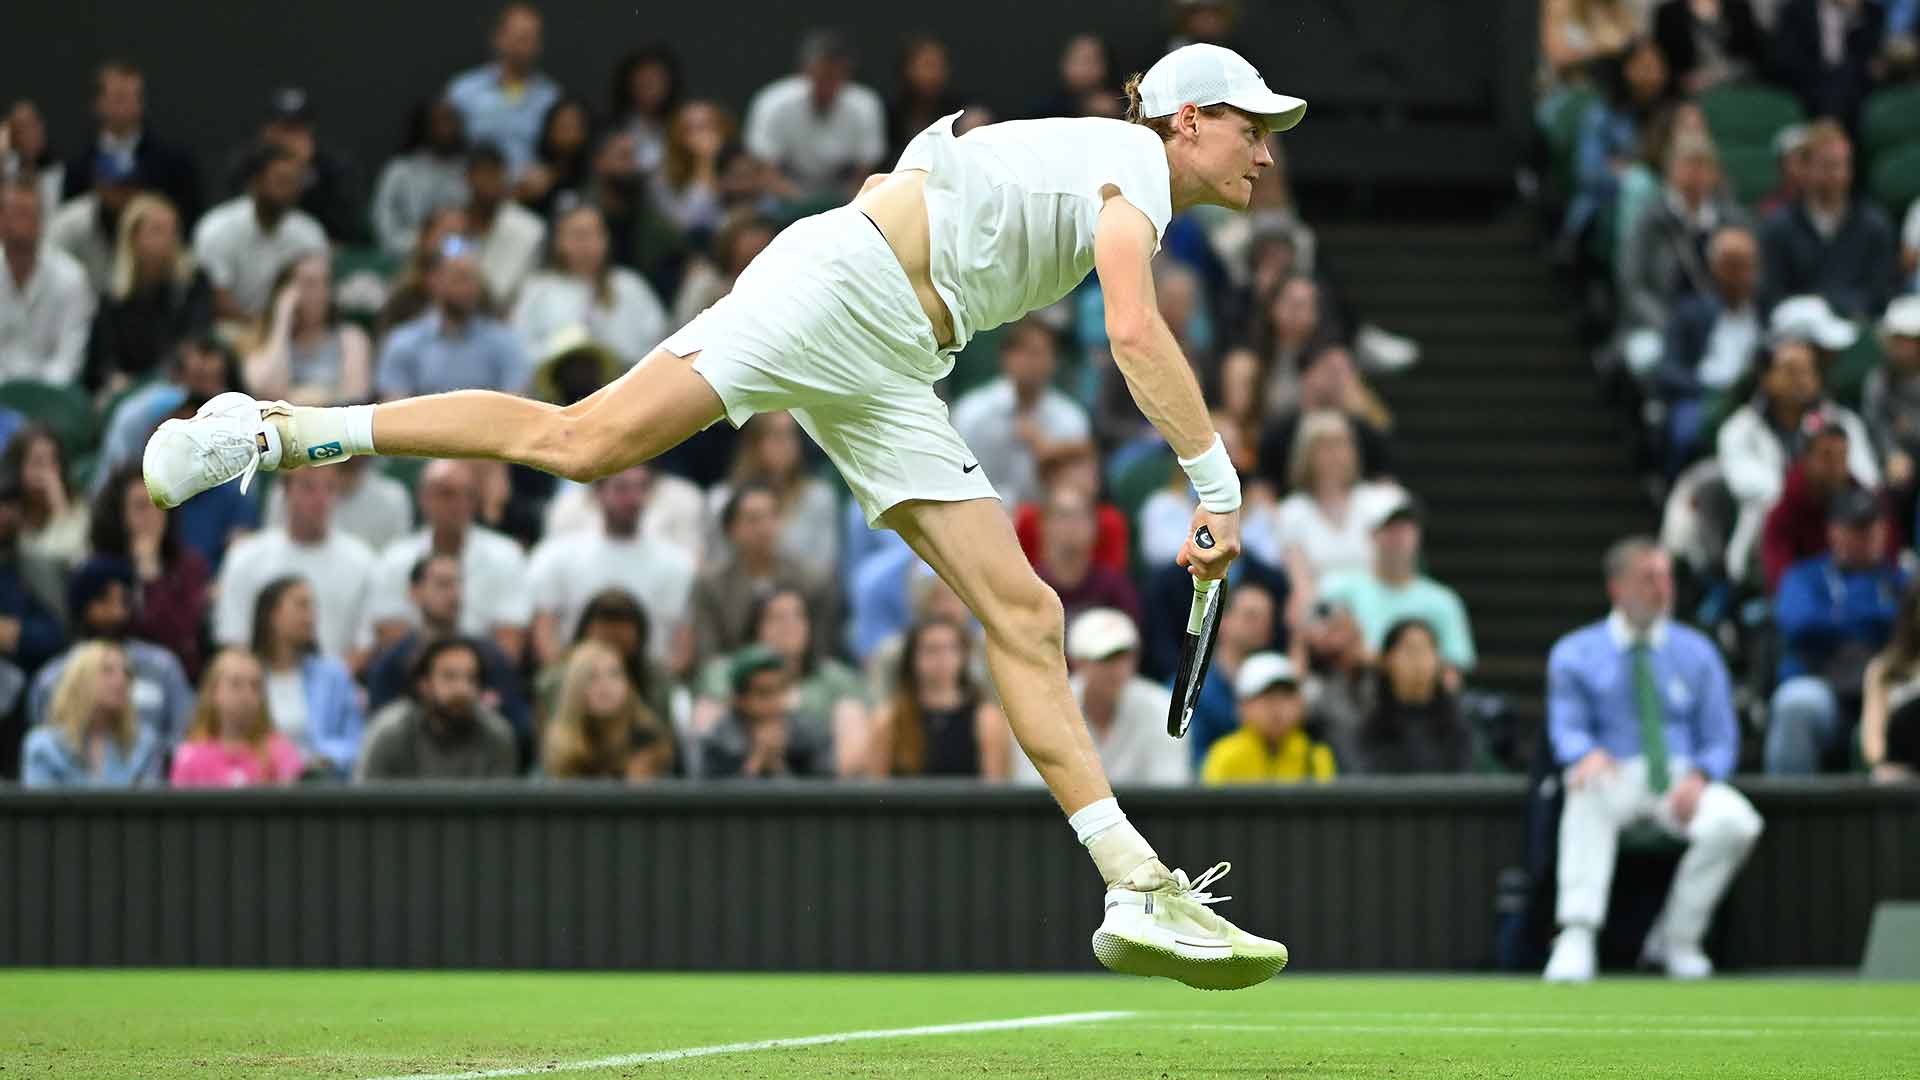 Jannik Sinner needs four sets to hold out fellow Italian Matteo Berrettini in the second round of Wimbledon.